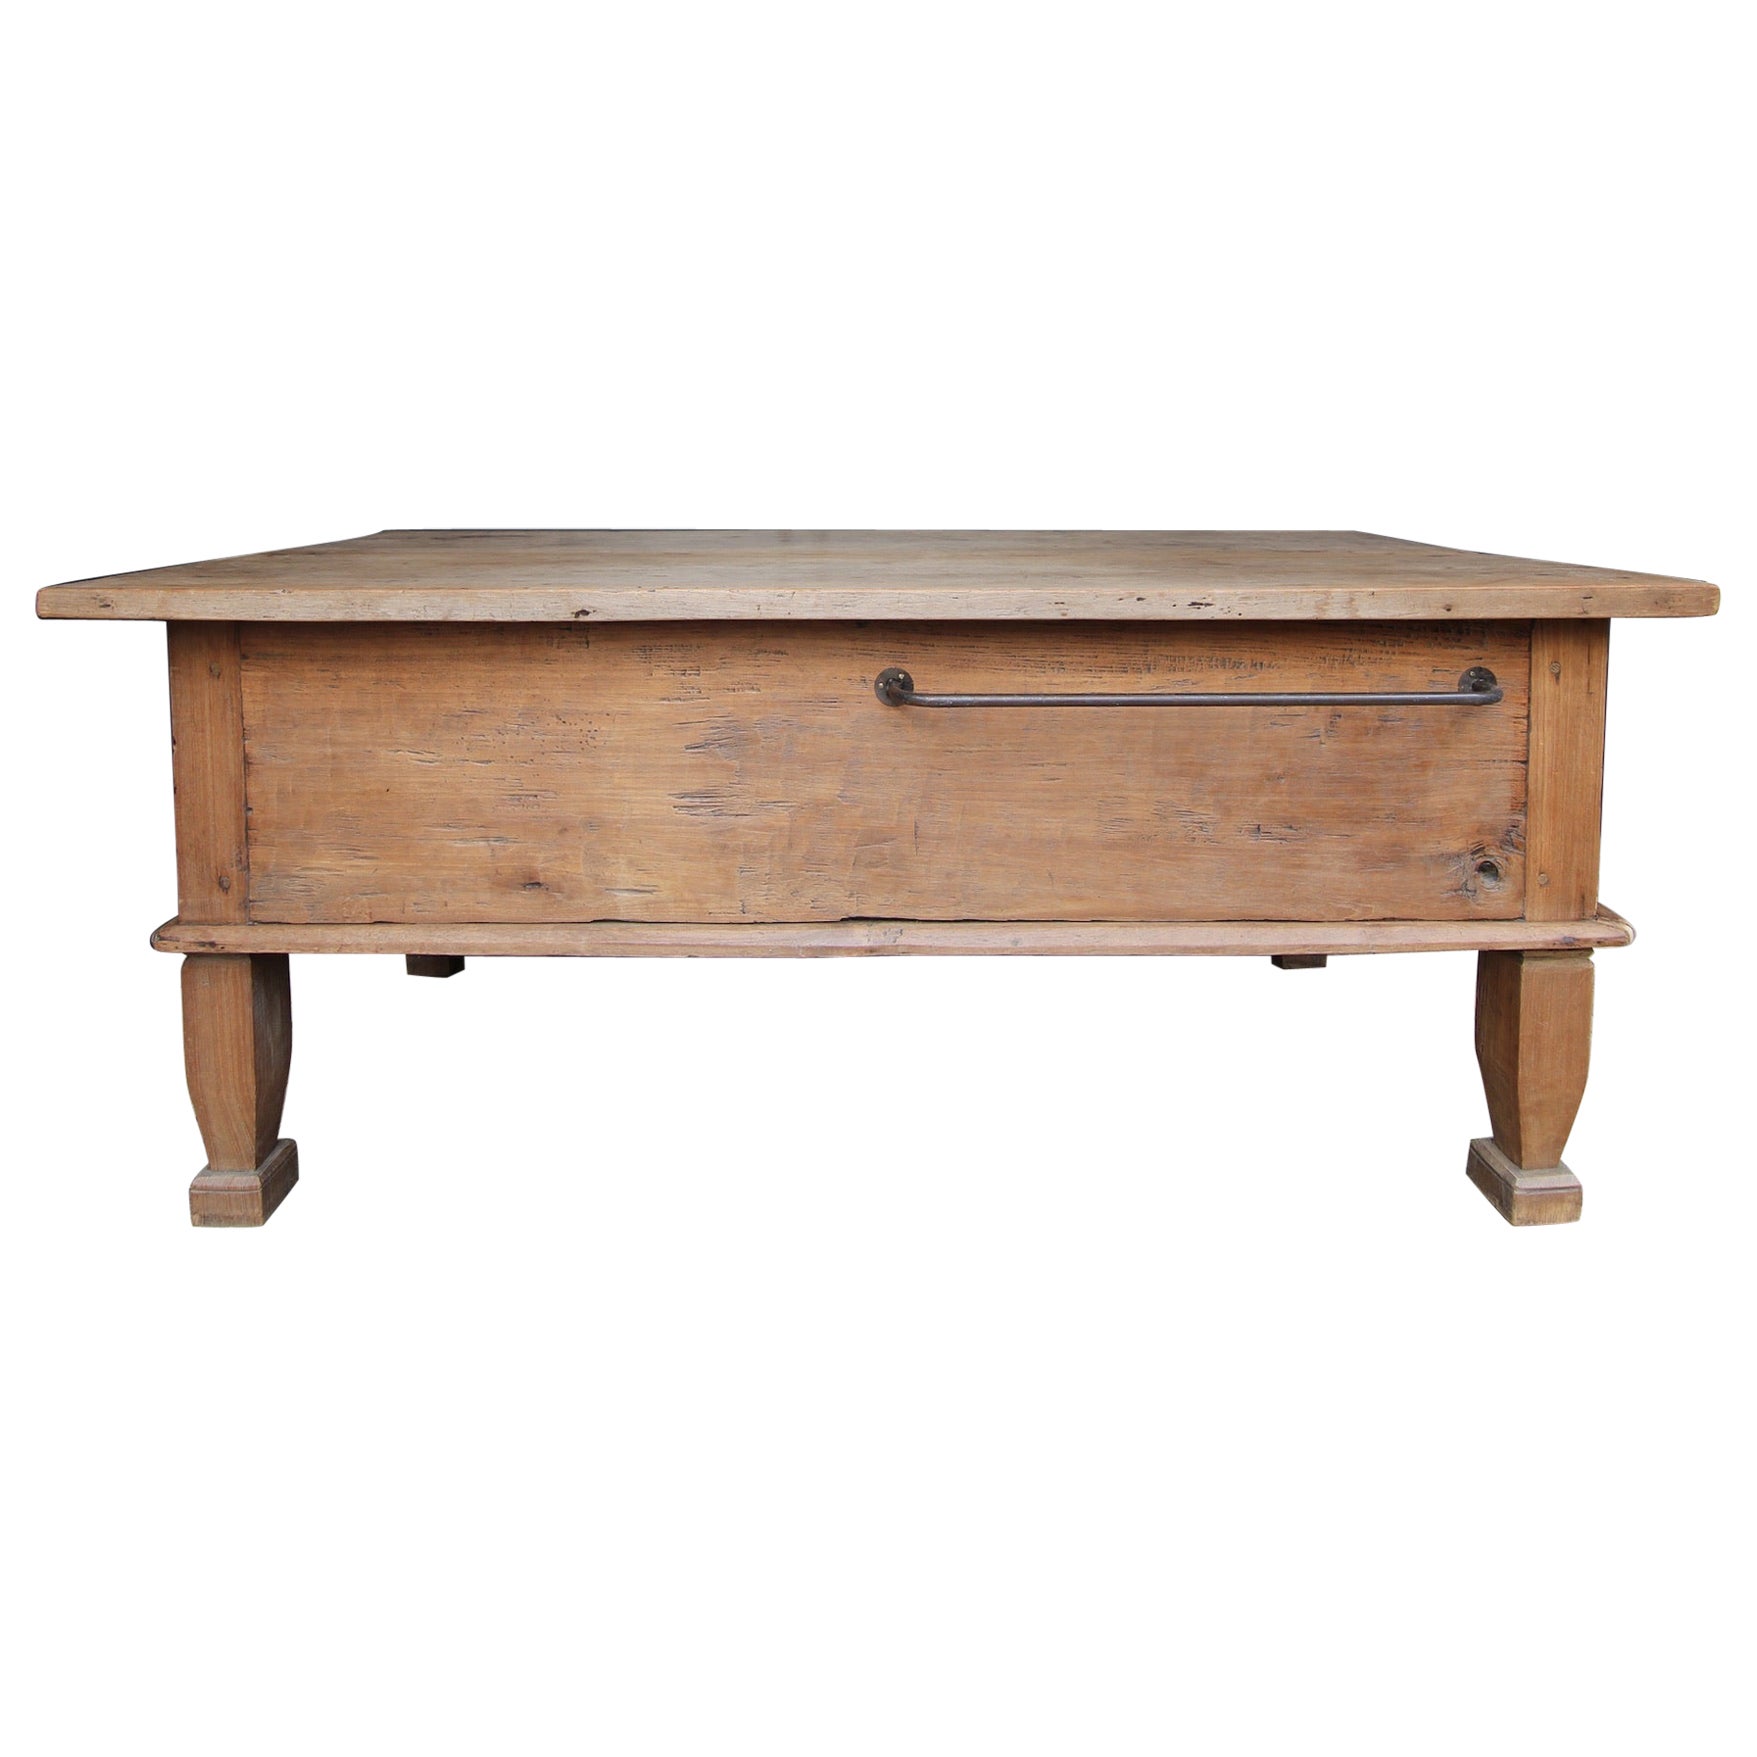 Early 19th Century Rustic Kitchen Prep Table or Kitchen Island